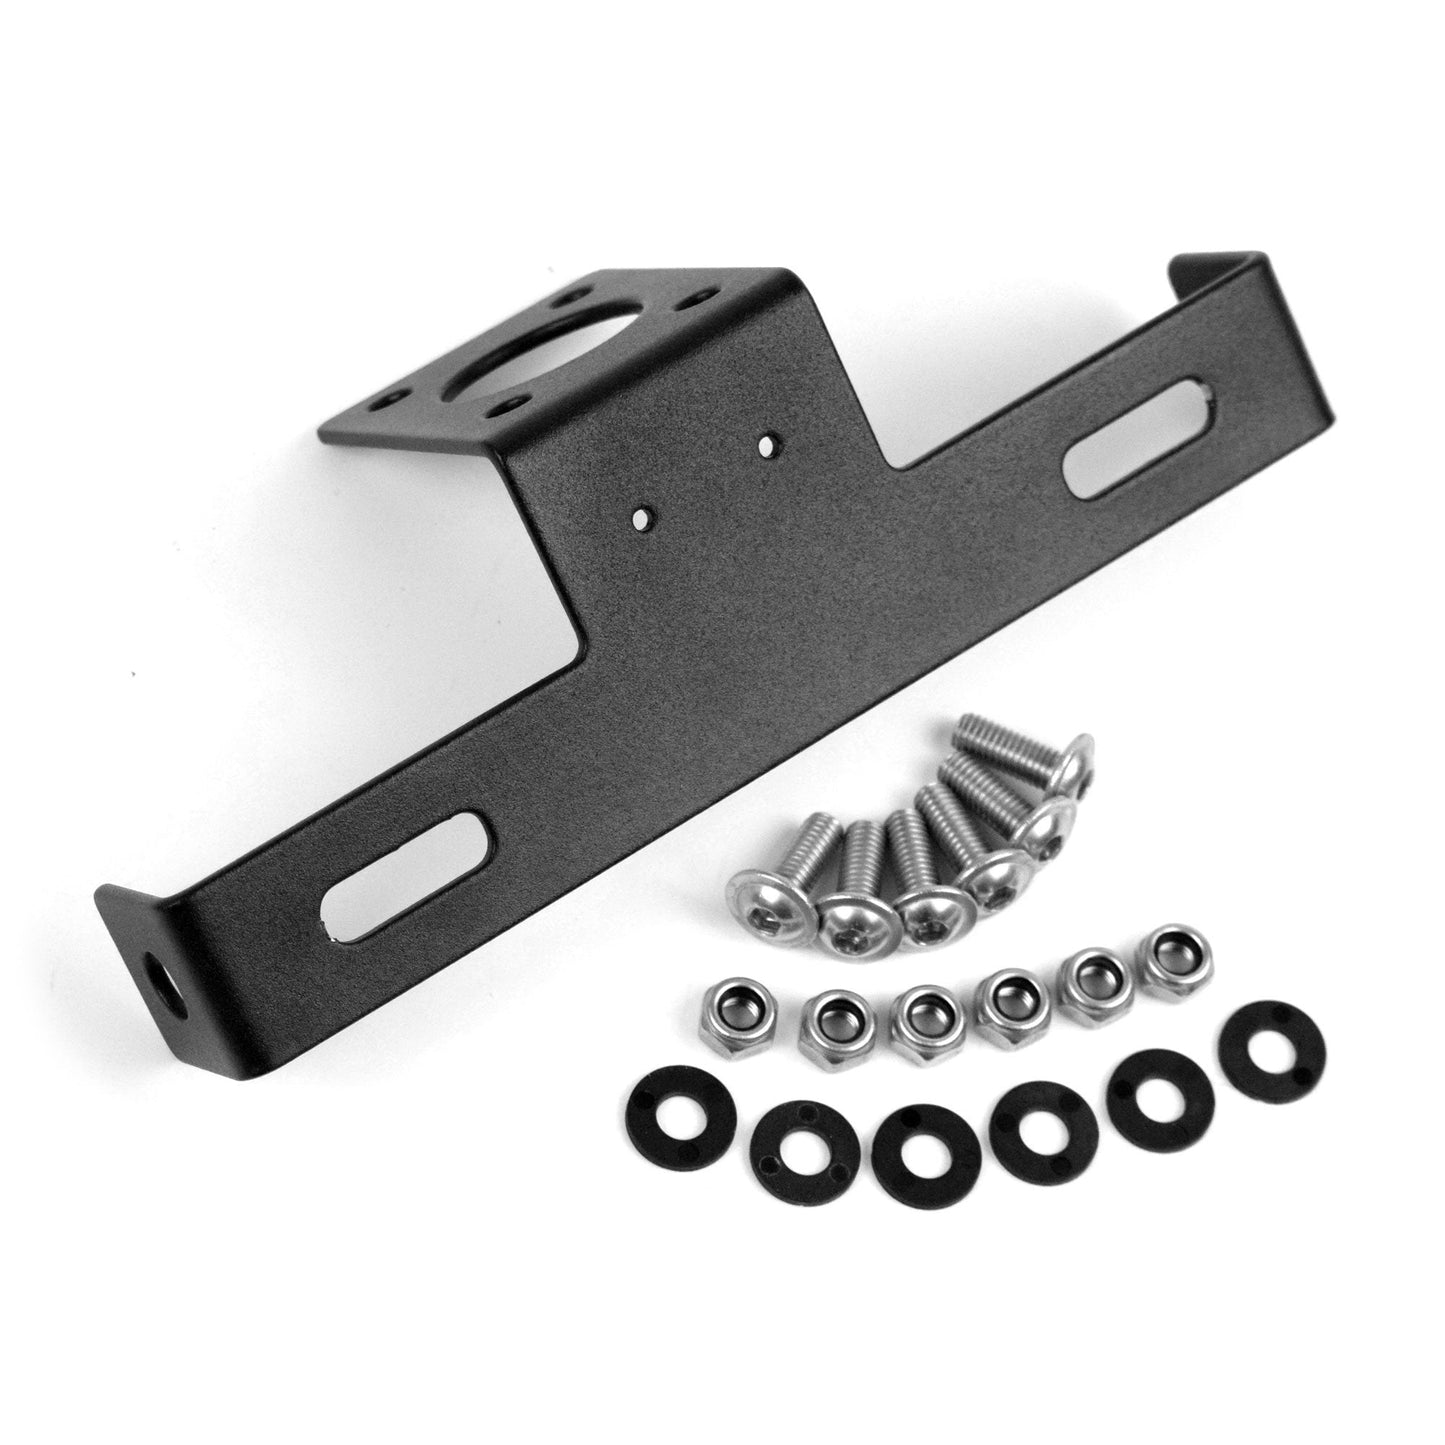 Pyramid Universal Tail Tidy Black Carbon Steel Motorcycle Rear Plate Holder